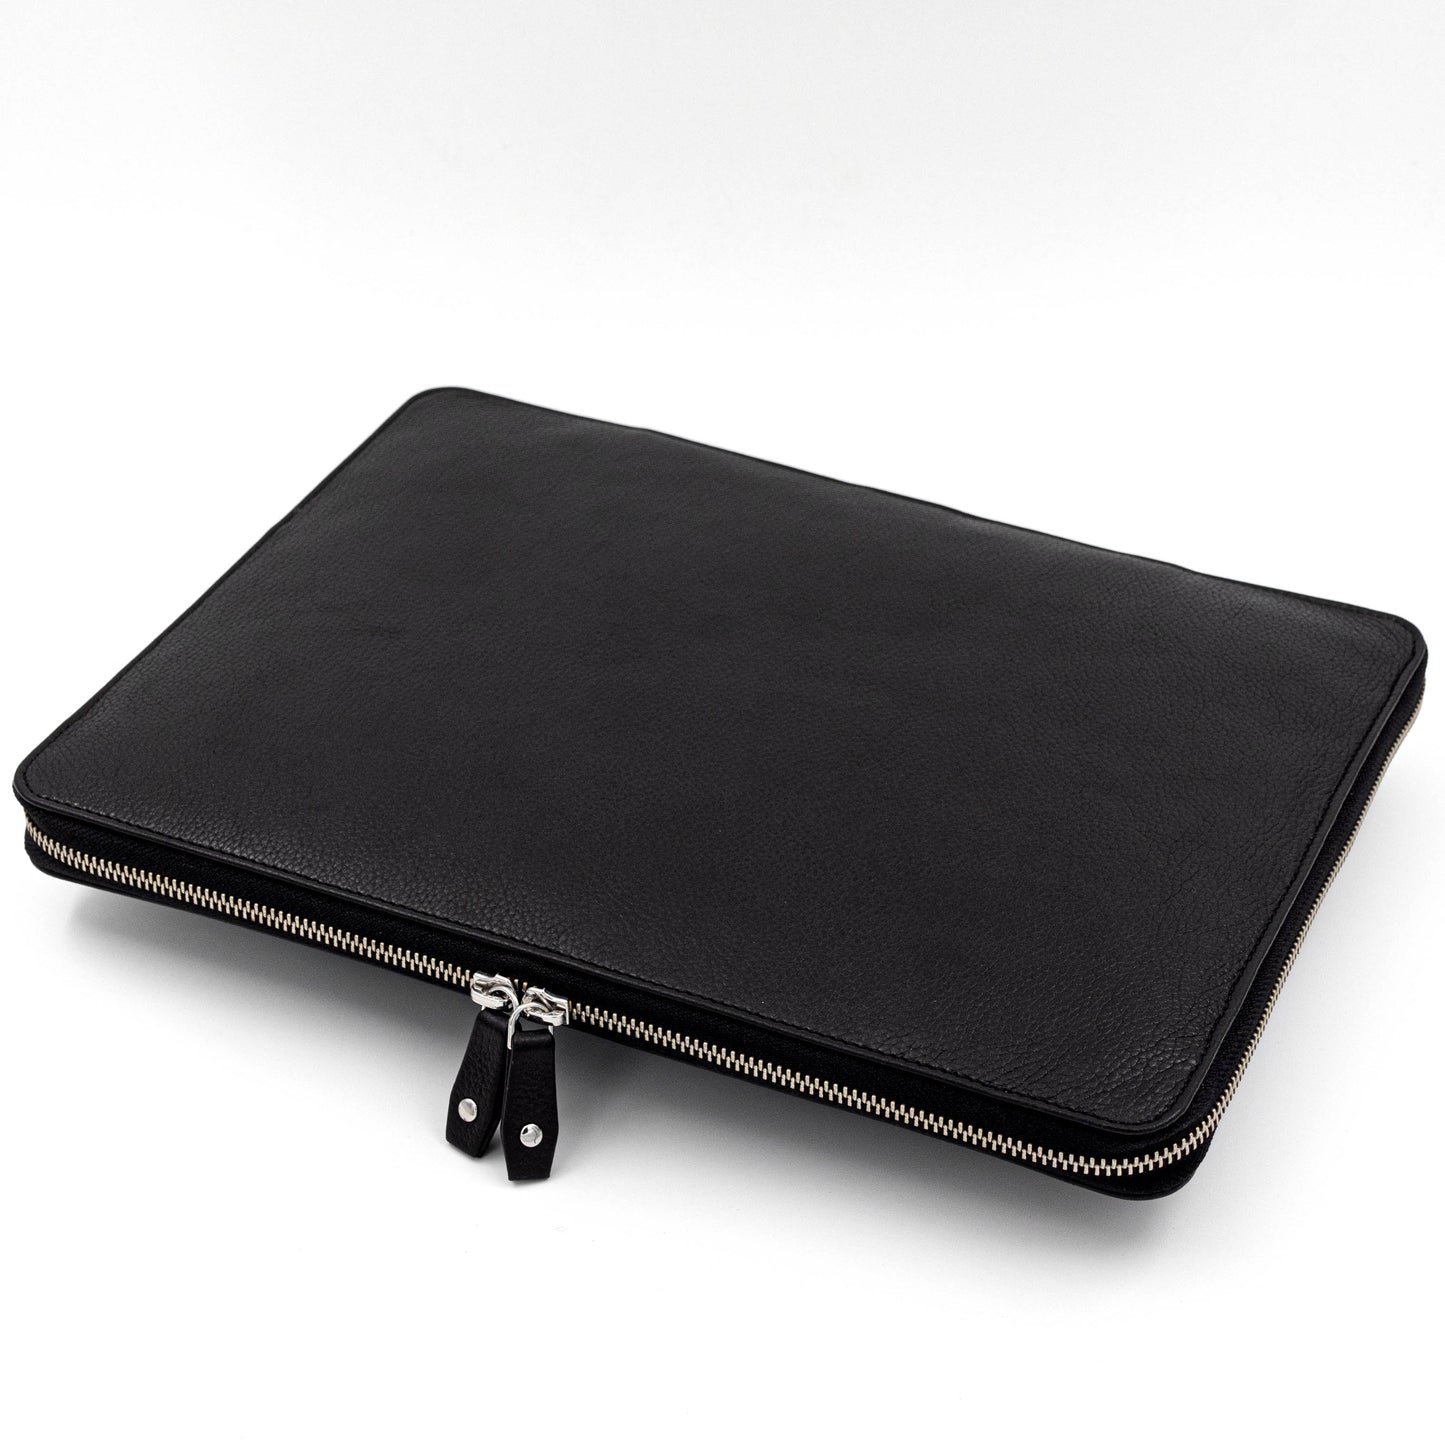 Dell XPS 13 case in black leather that is pebble grained.